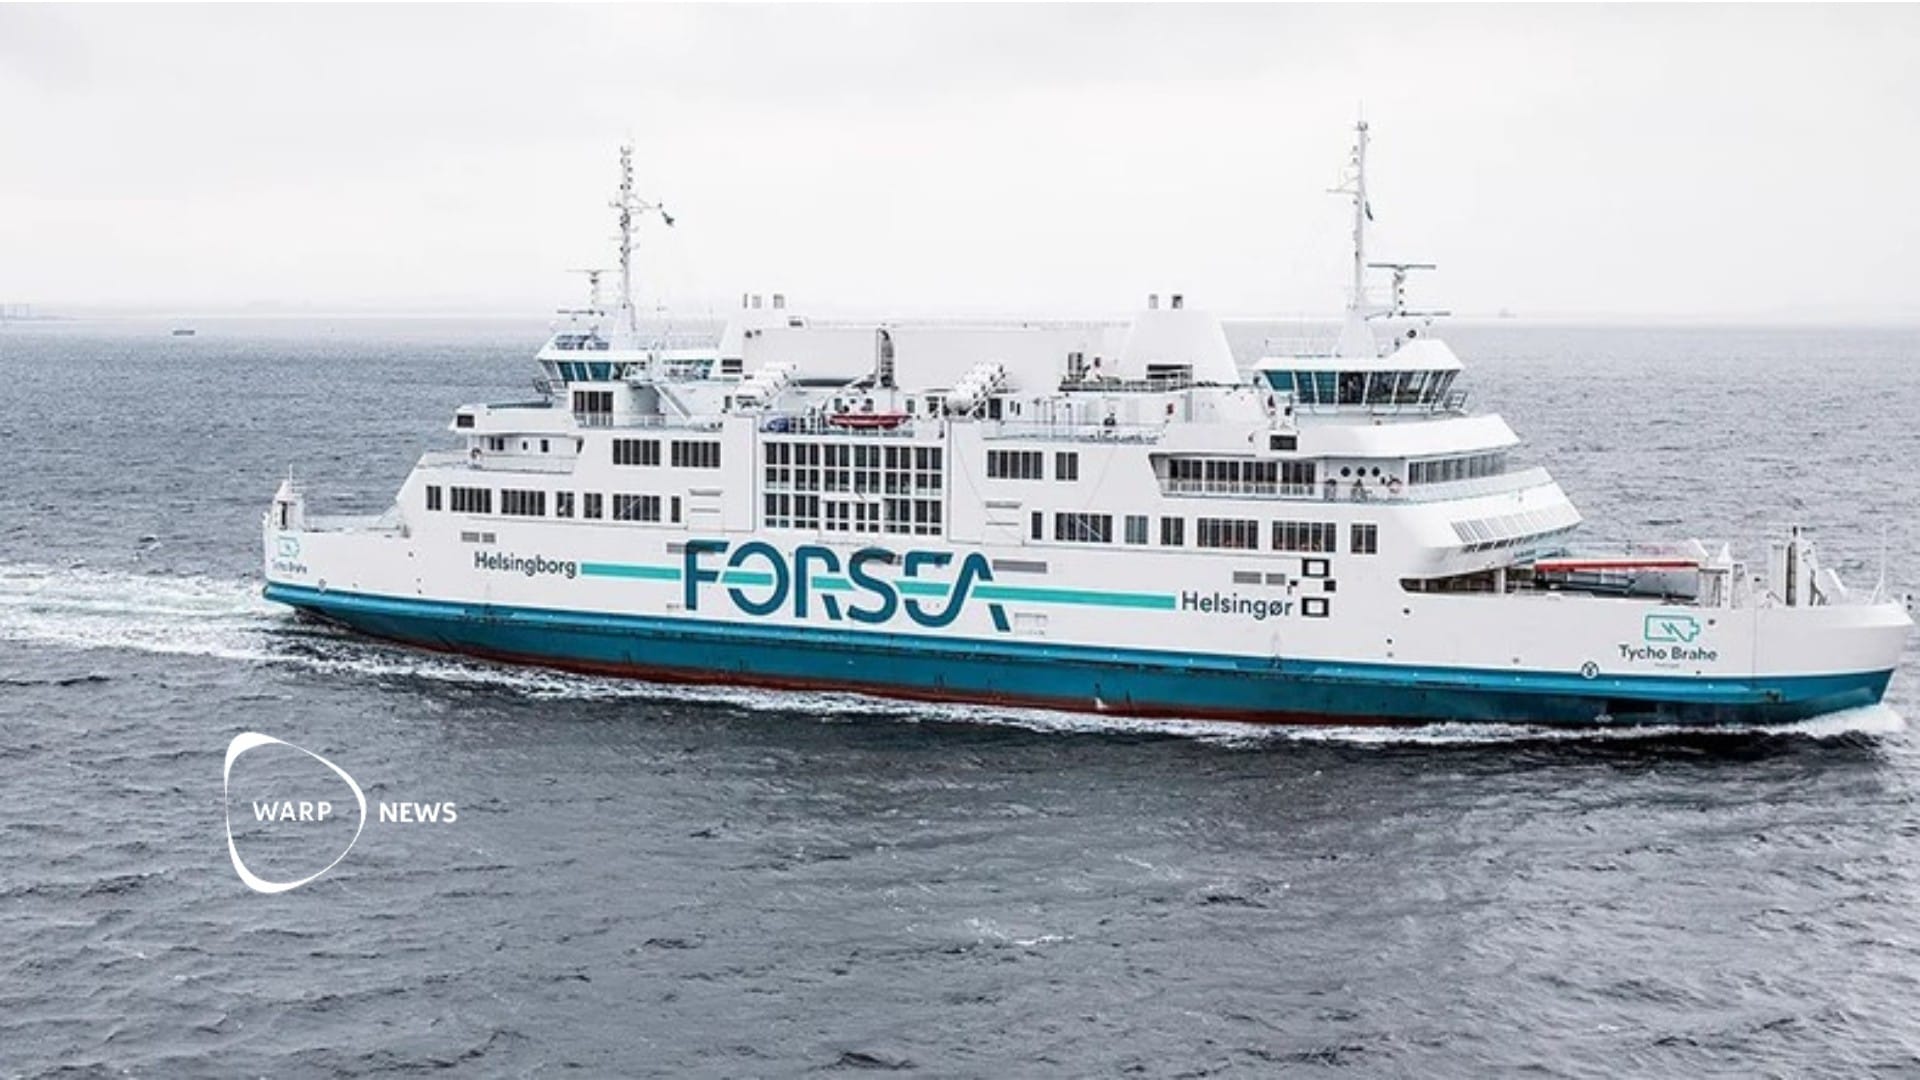 🚢 The world's largest electric ferry charges in six minutes - and reduces emissions